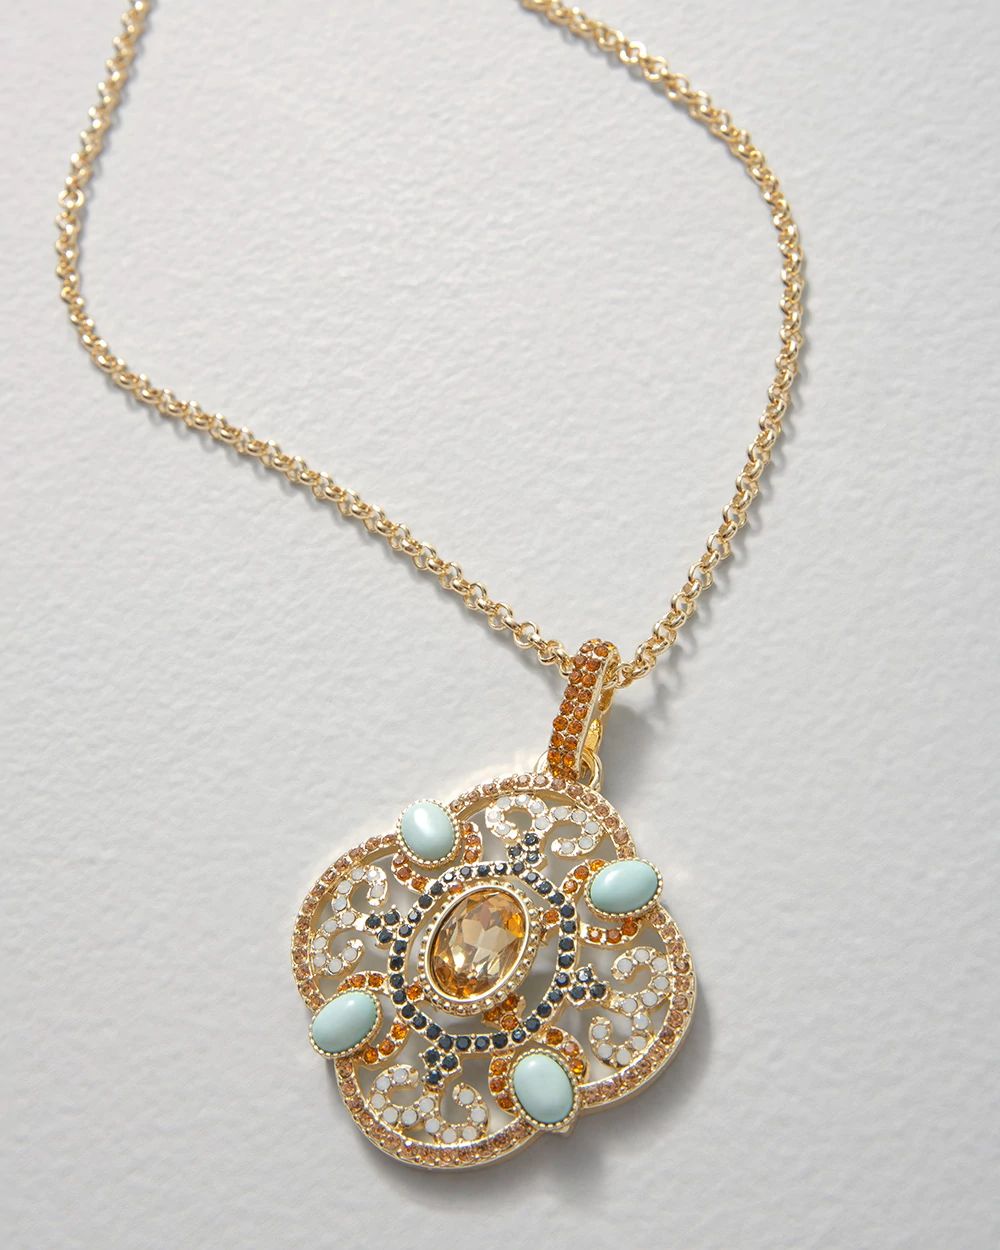 Goldtone + Blue Pendant Statement Necklace click to view larger image.